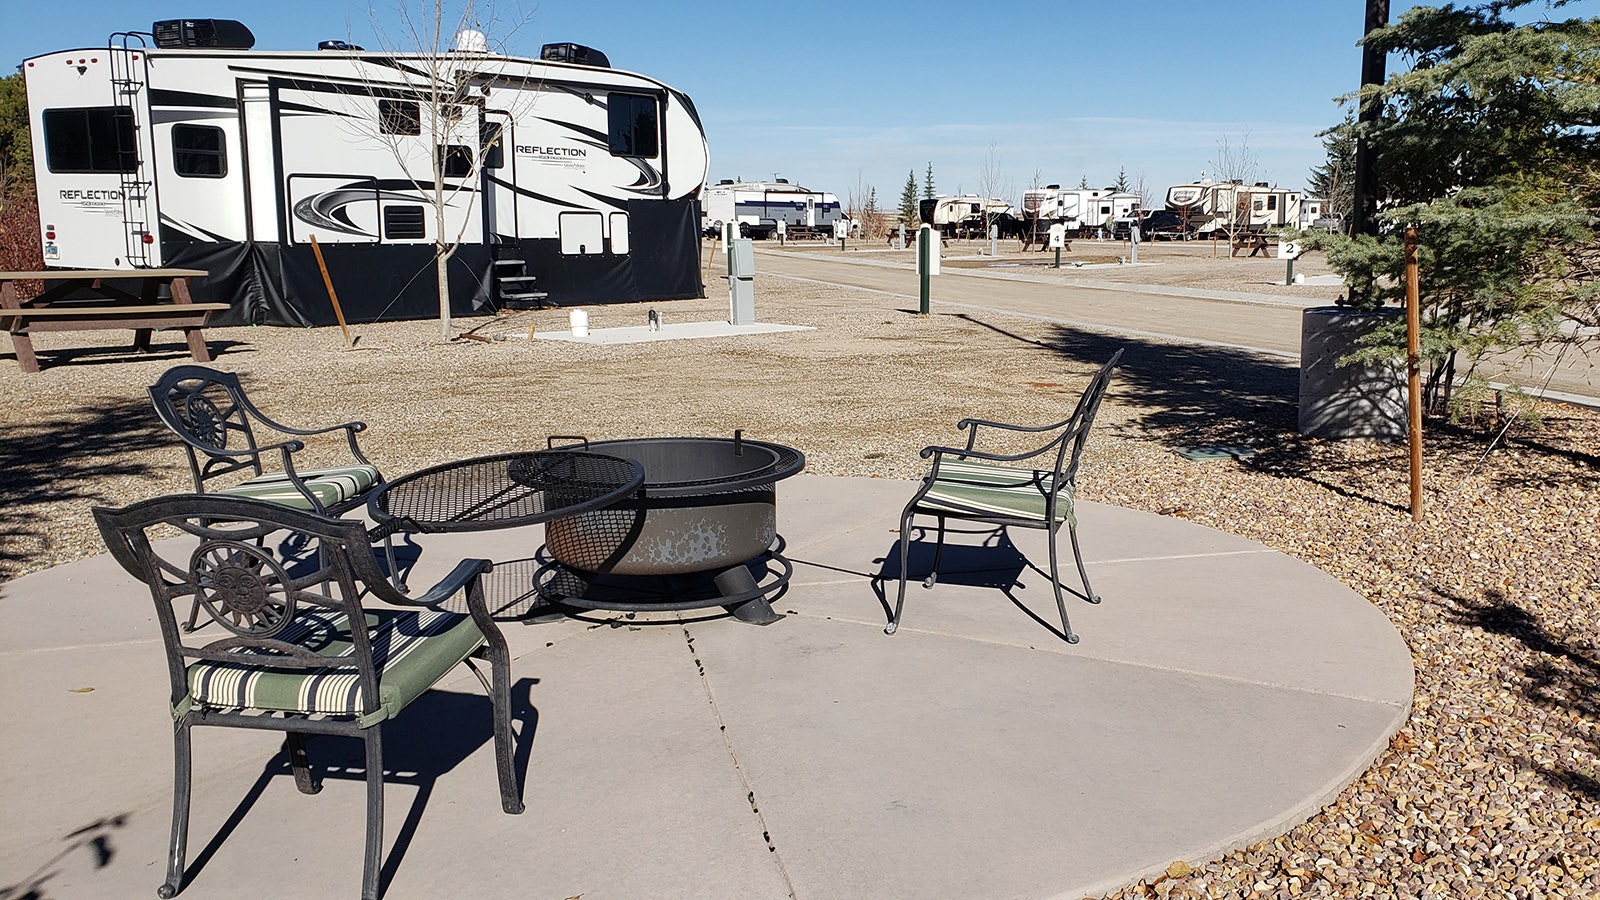 The RV site with picnic areas like this one is a new addition to Little America Wyoming.